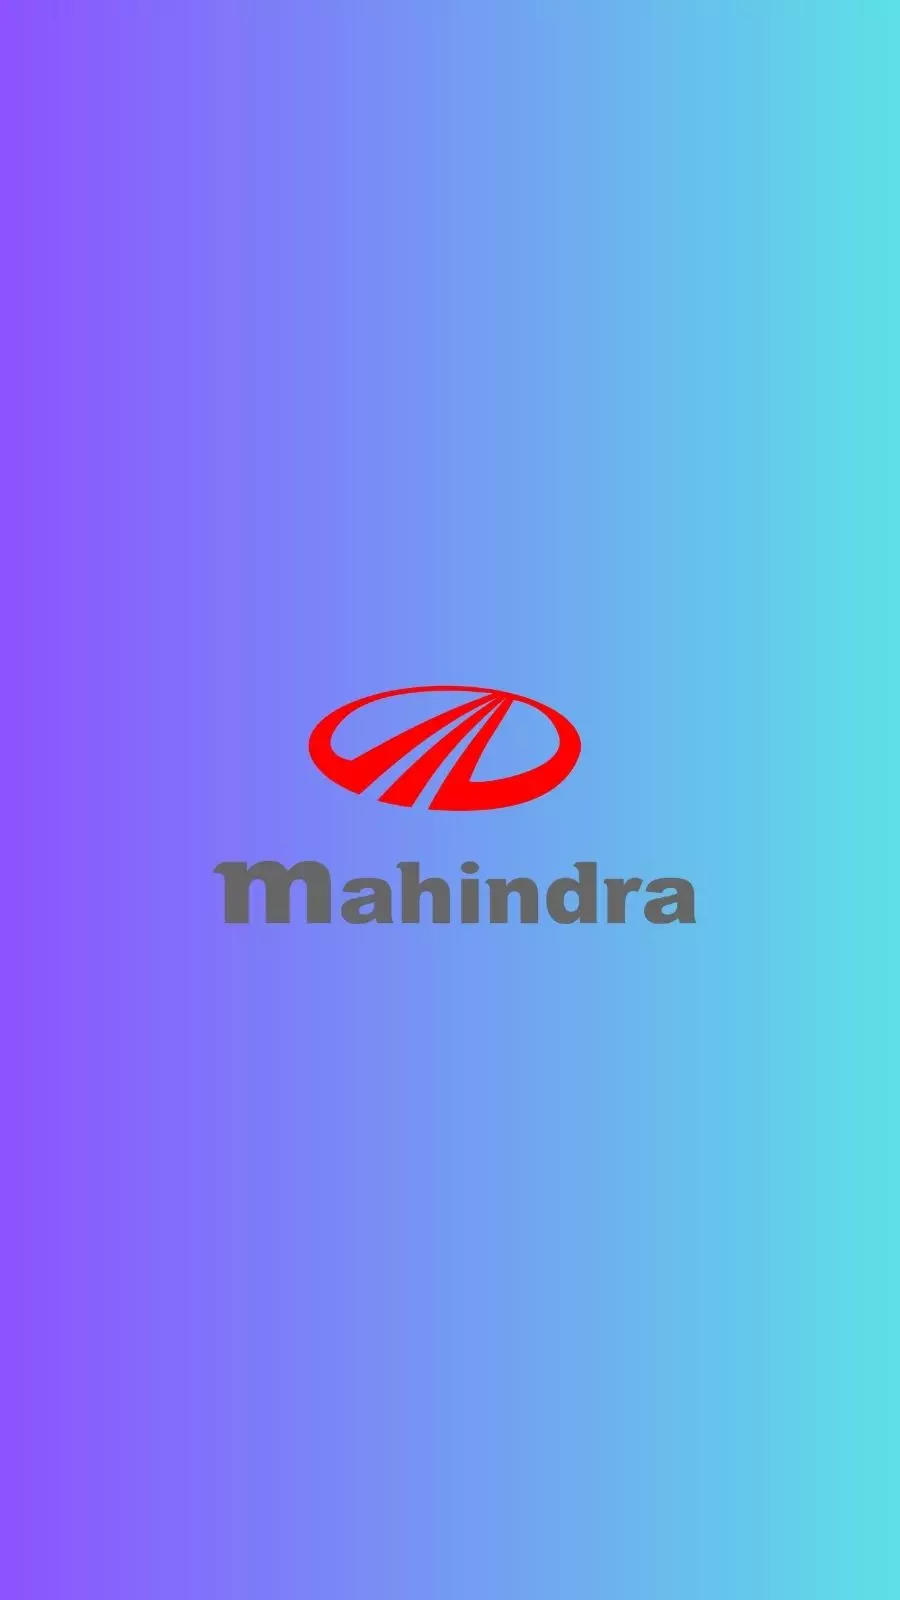 Mahindra Finance launches special deposit scheme - ask.CAREERS